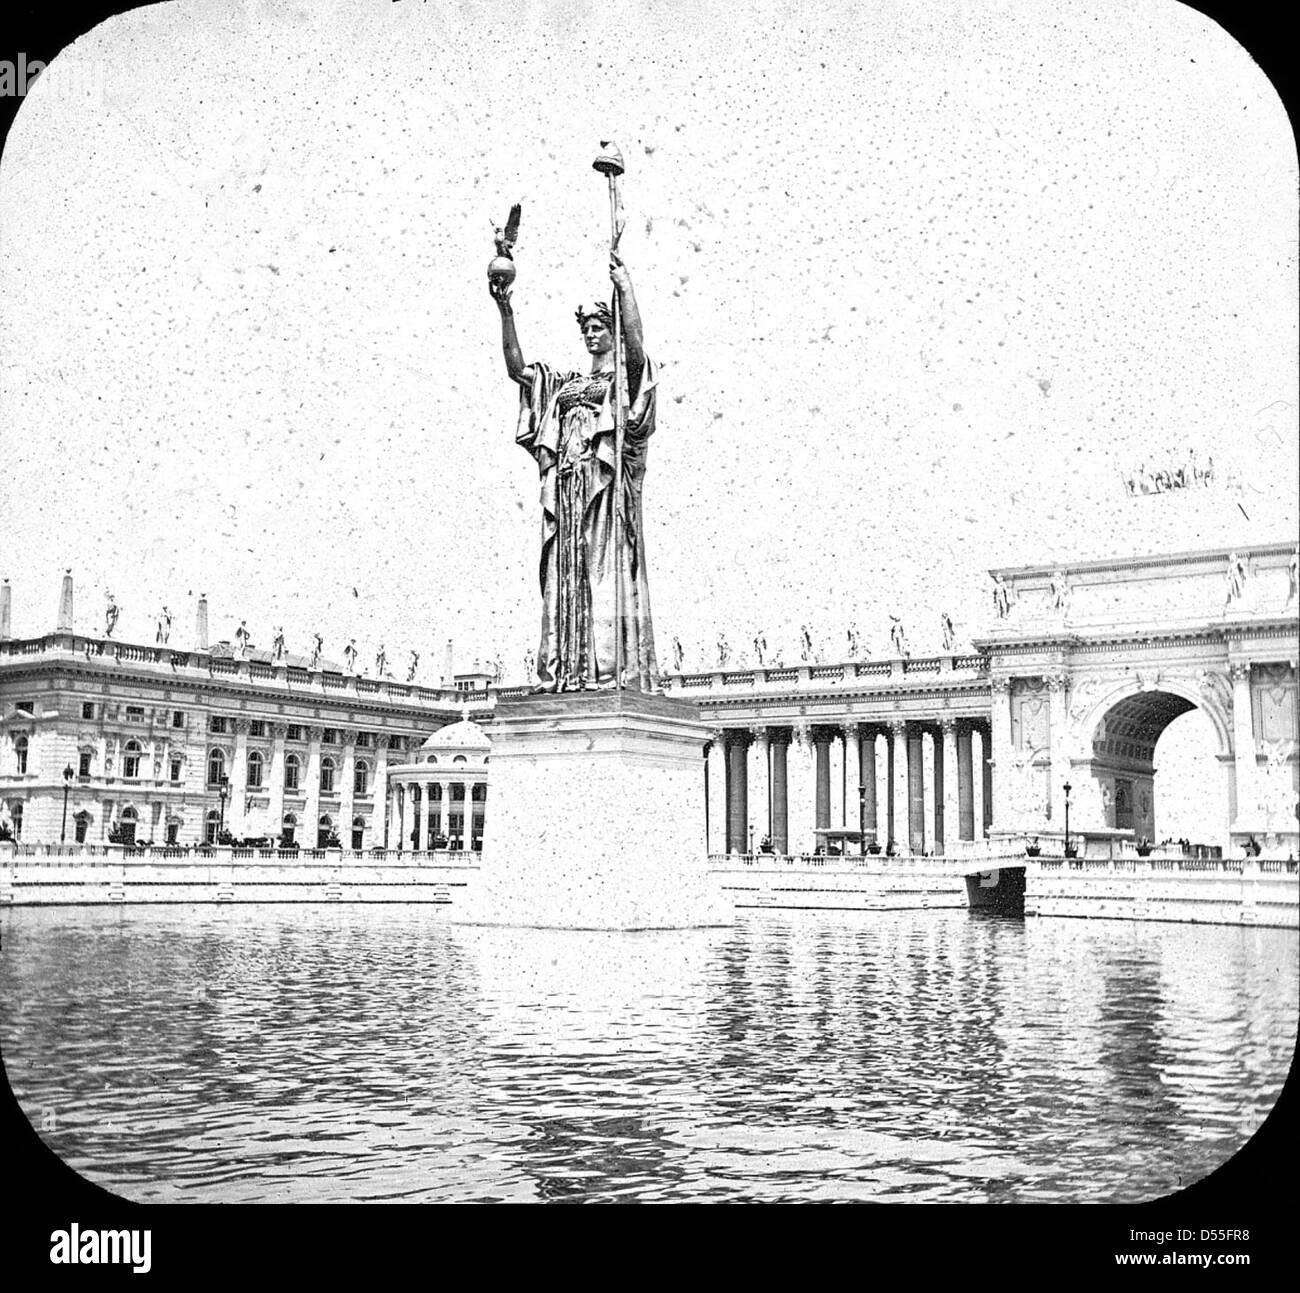 World's Columbian Exposition: Statue of the Republic, Chicago, United